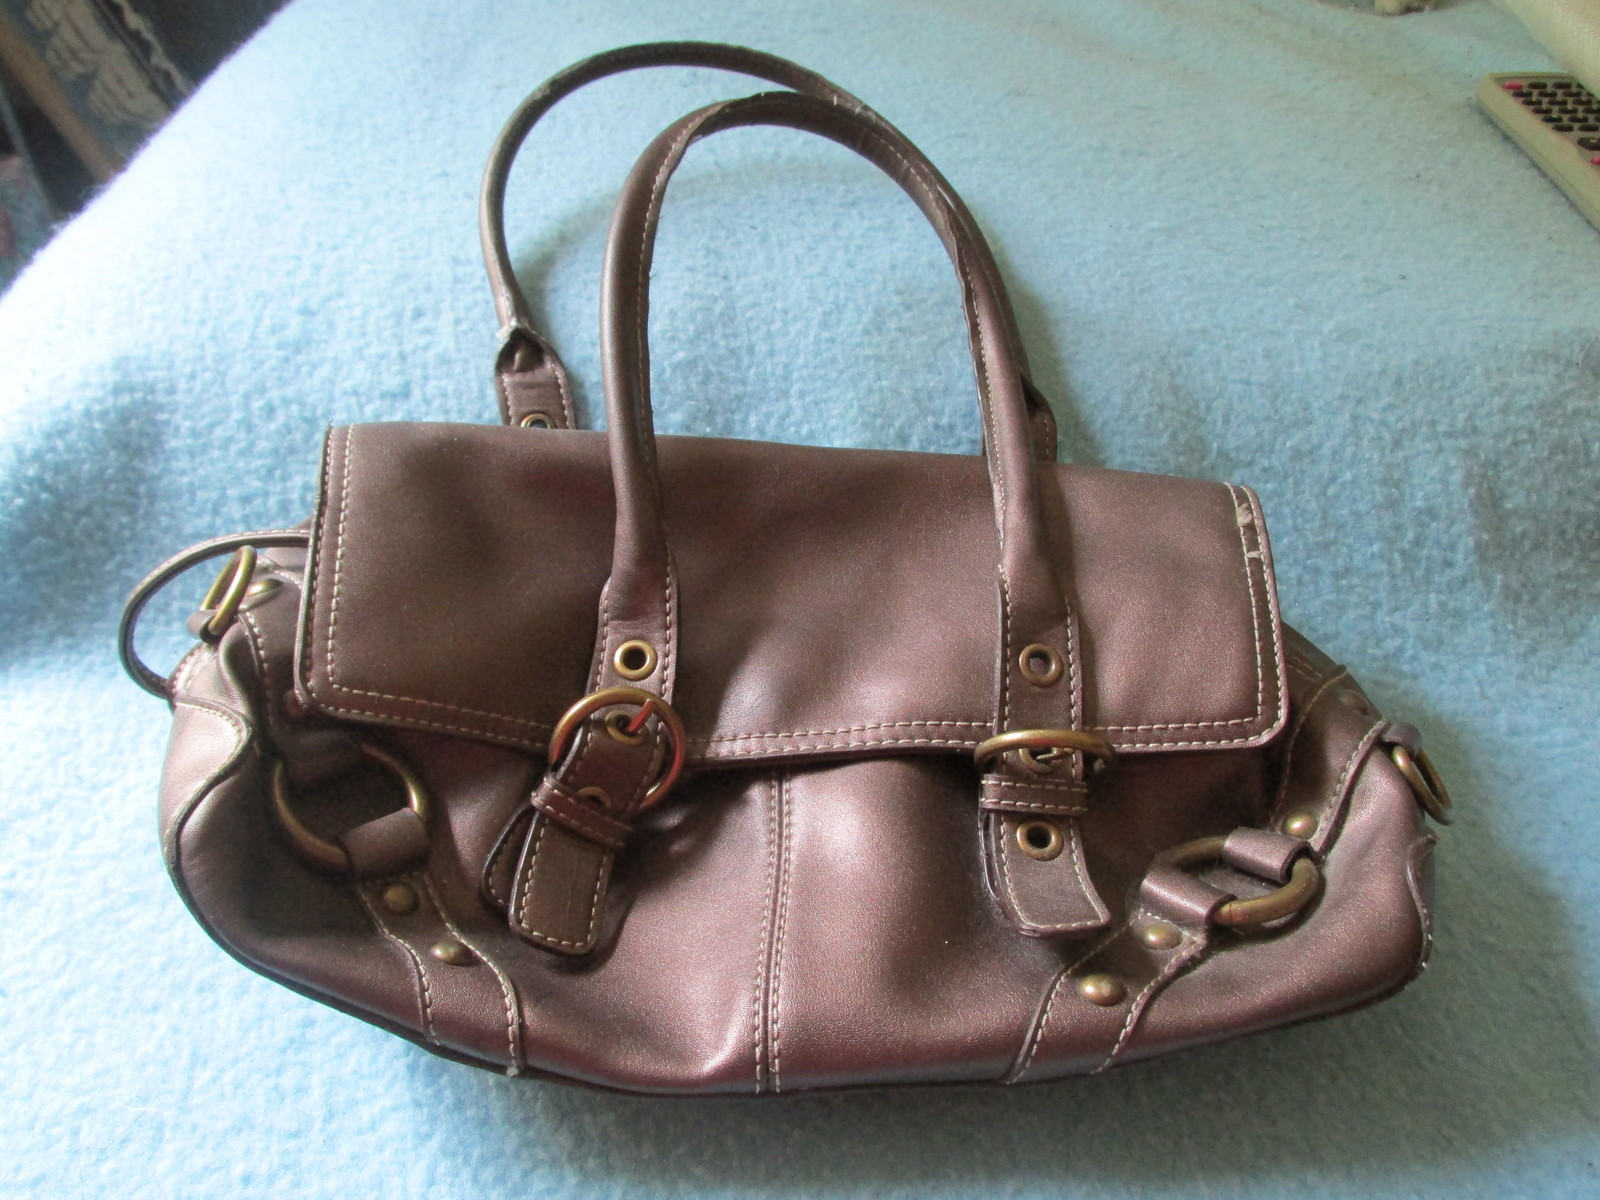 Nine West Used Leather Purse - Used Scratched Mirror - Mild Stained Soft Leather - Handbags & Purses